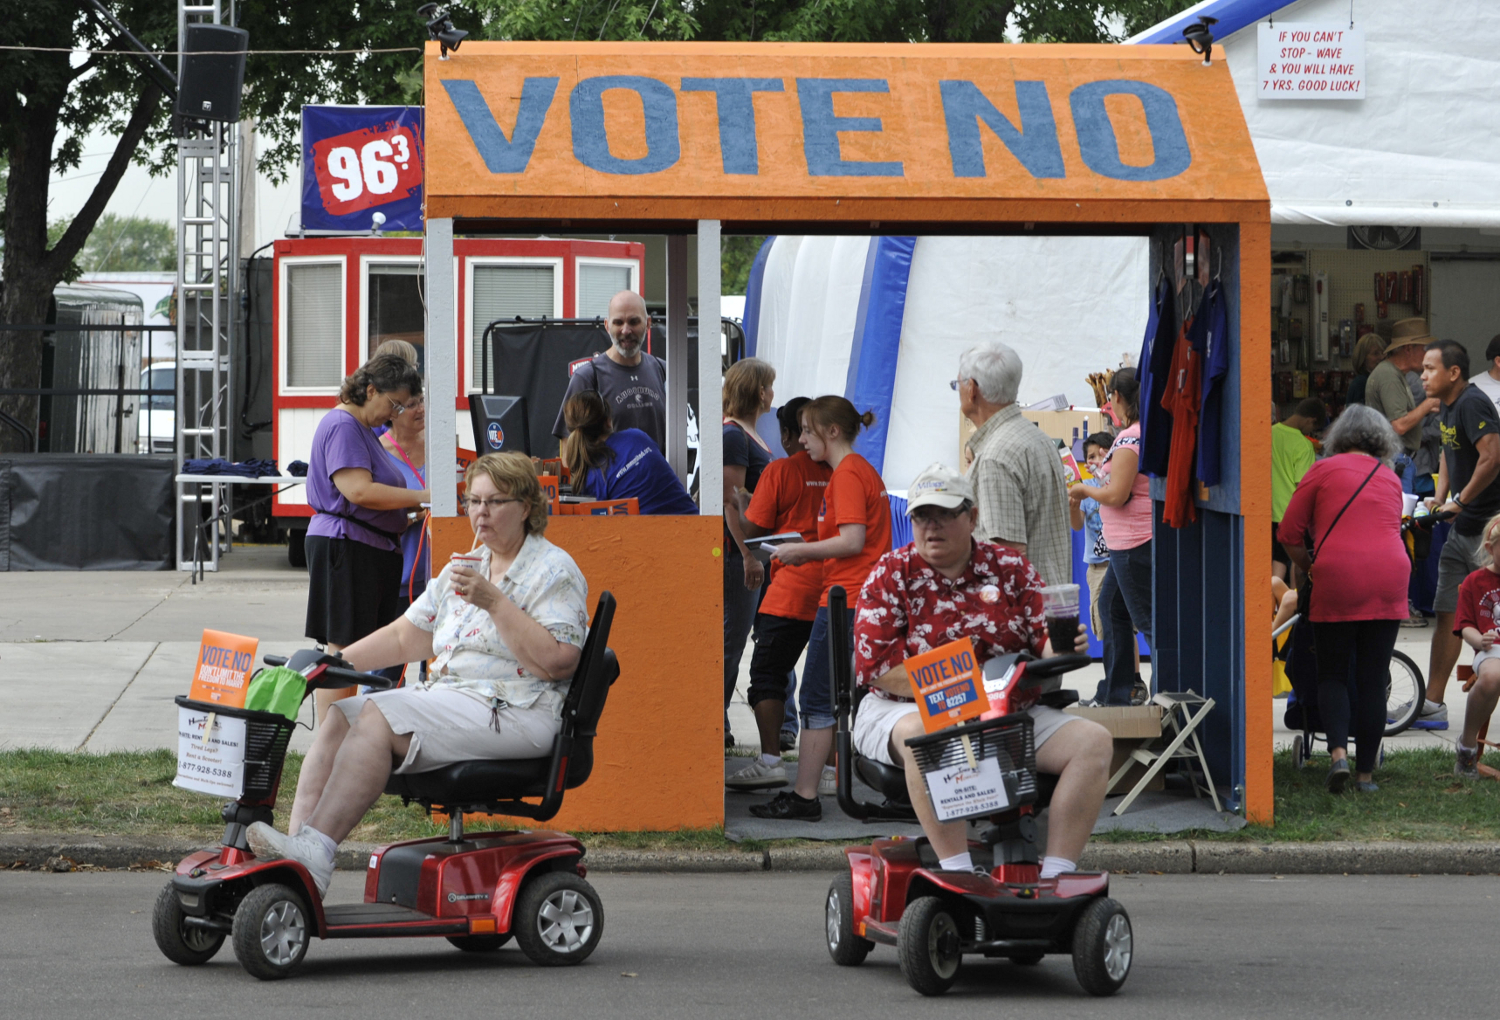 On Aug. 23 in Falcon Heights, a Minnesota State Fair booth calls for a no vote on a state amendment banning gay marriage. (AP Photo/Jim Mone)